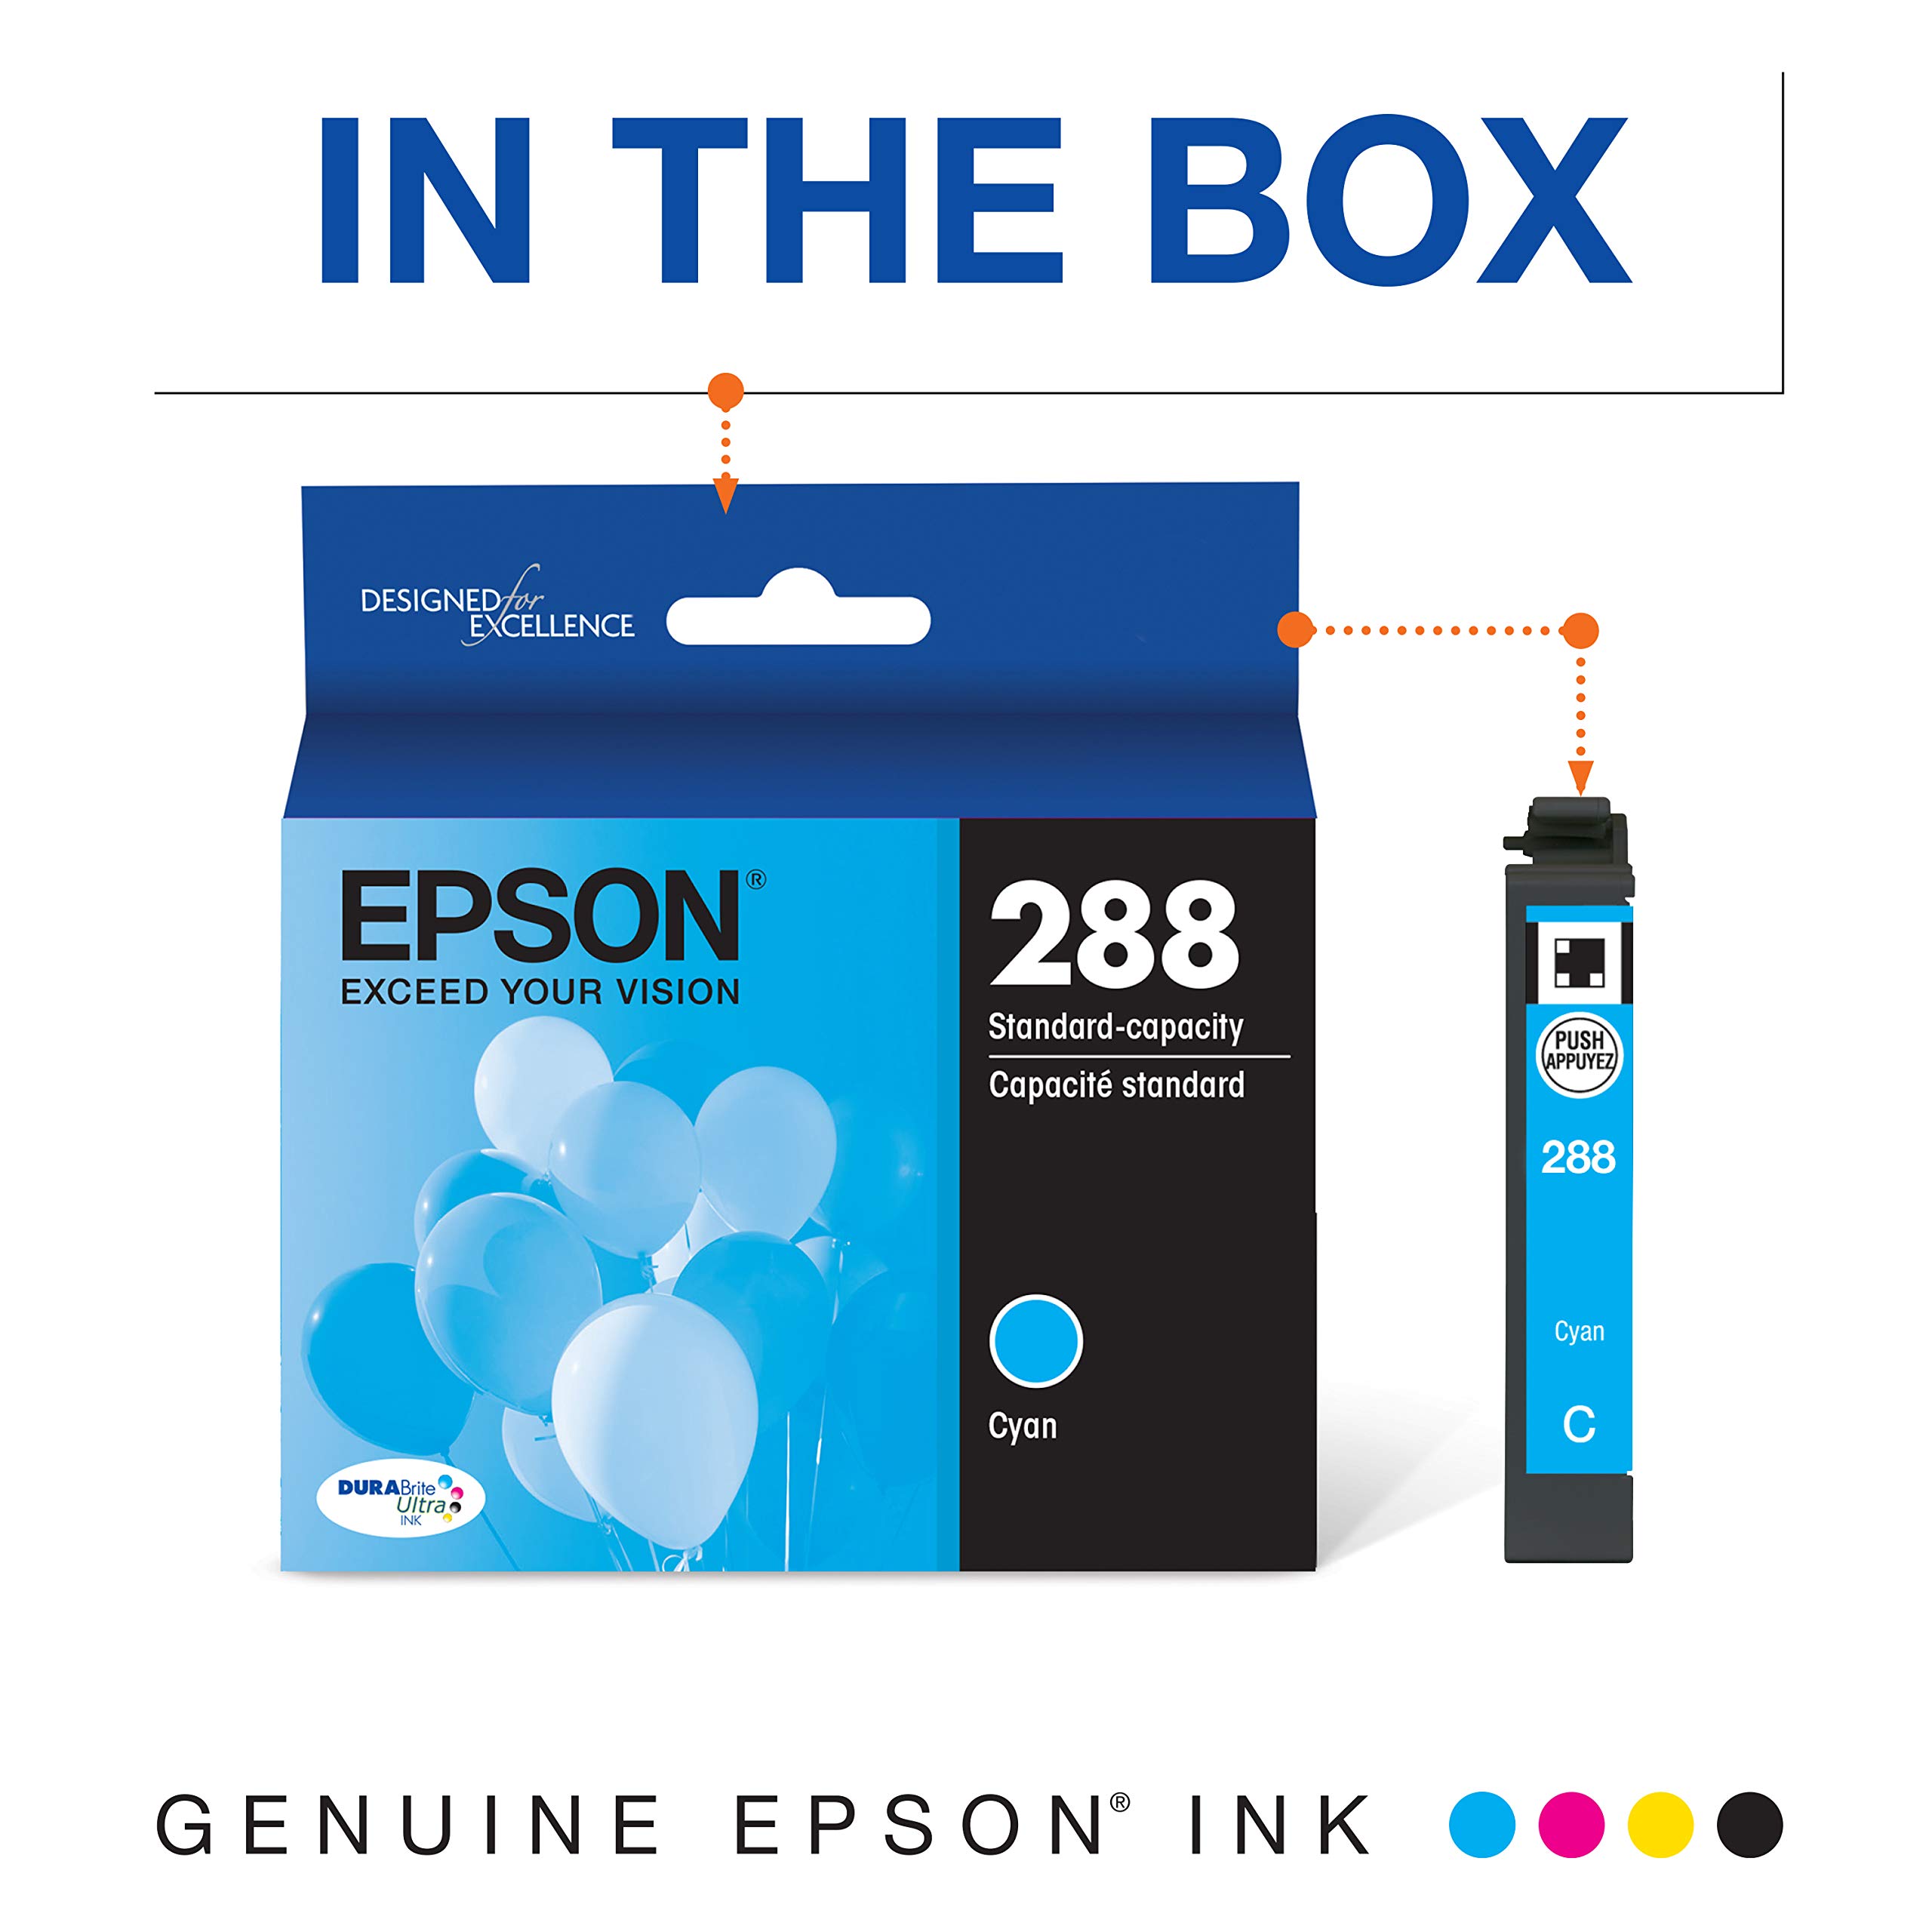 EPSON T288 DURABrite Ultra Ink Standard Capacity Cyan Cartridge (T288220-S) for select Epson Expression Printers, 1 Count (Pack of 1)